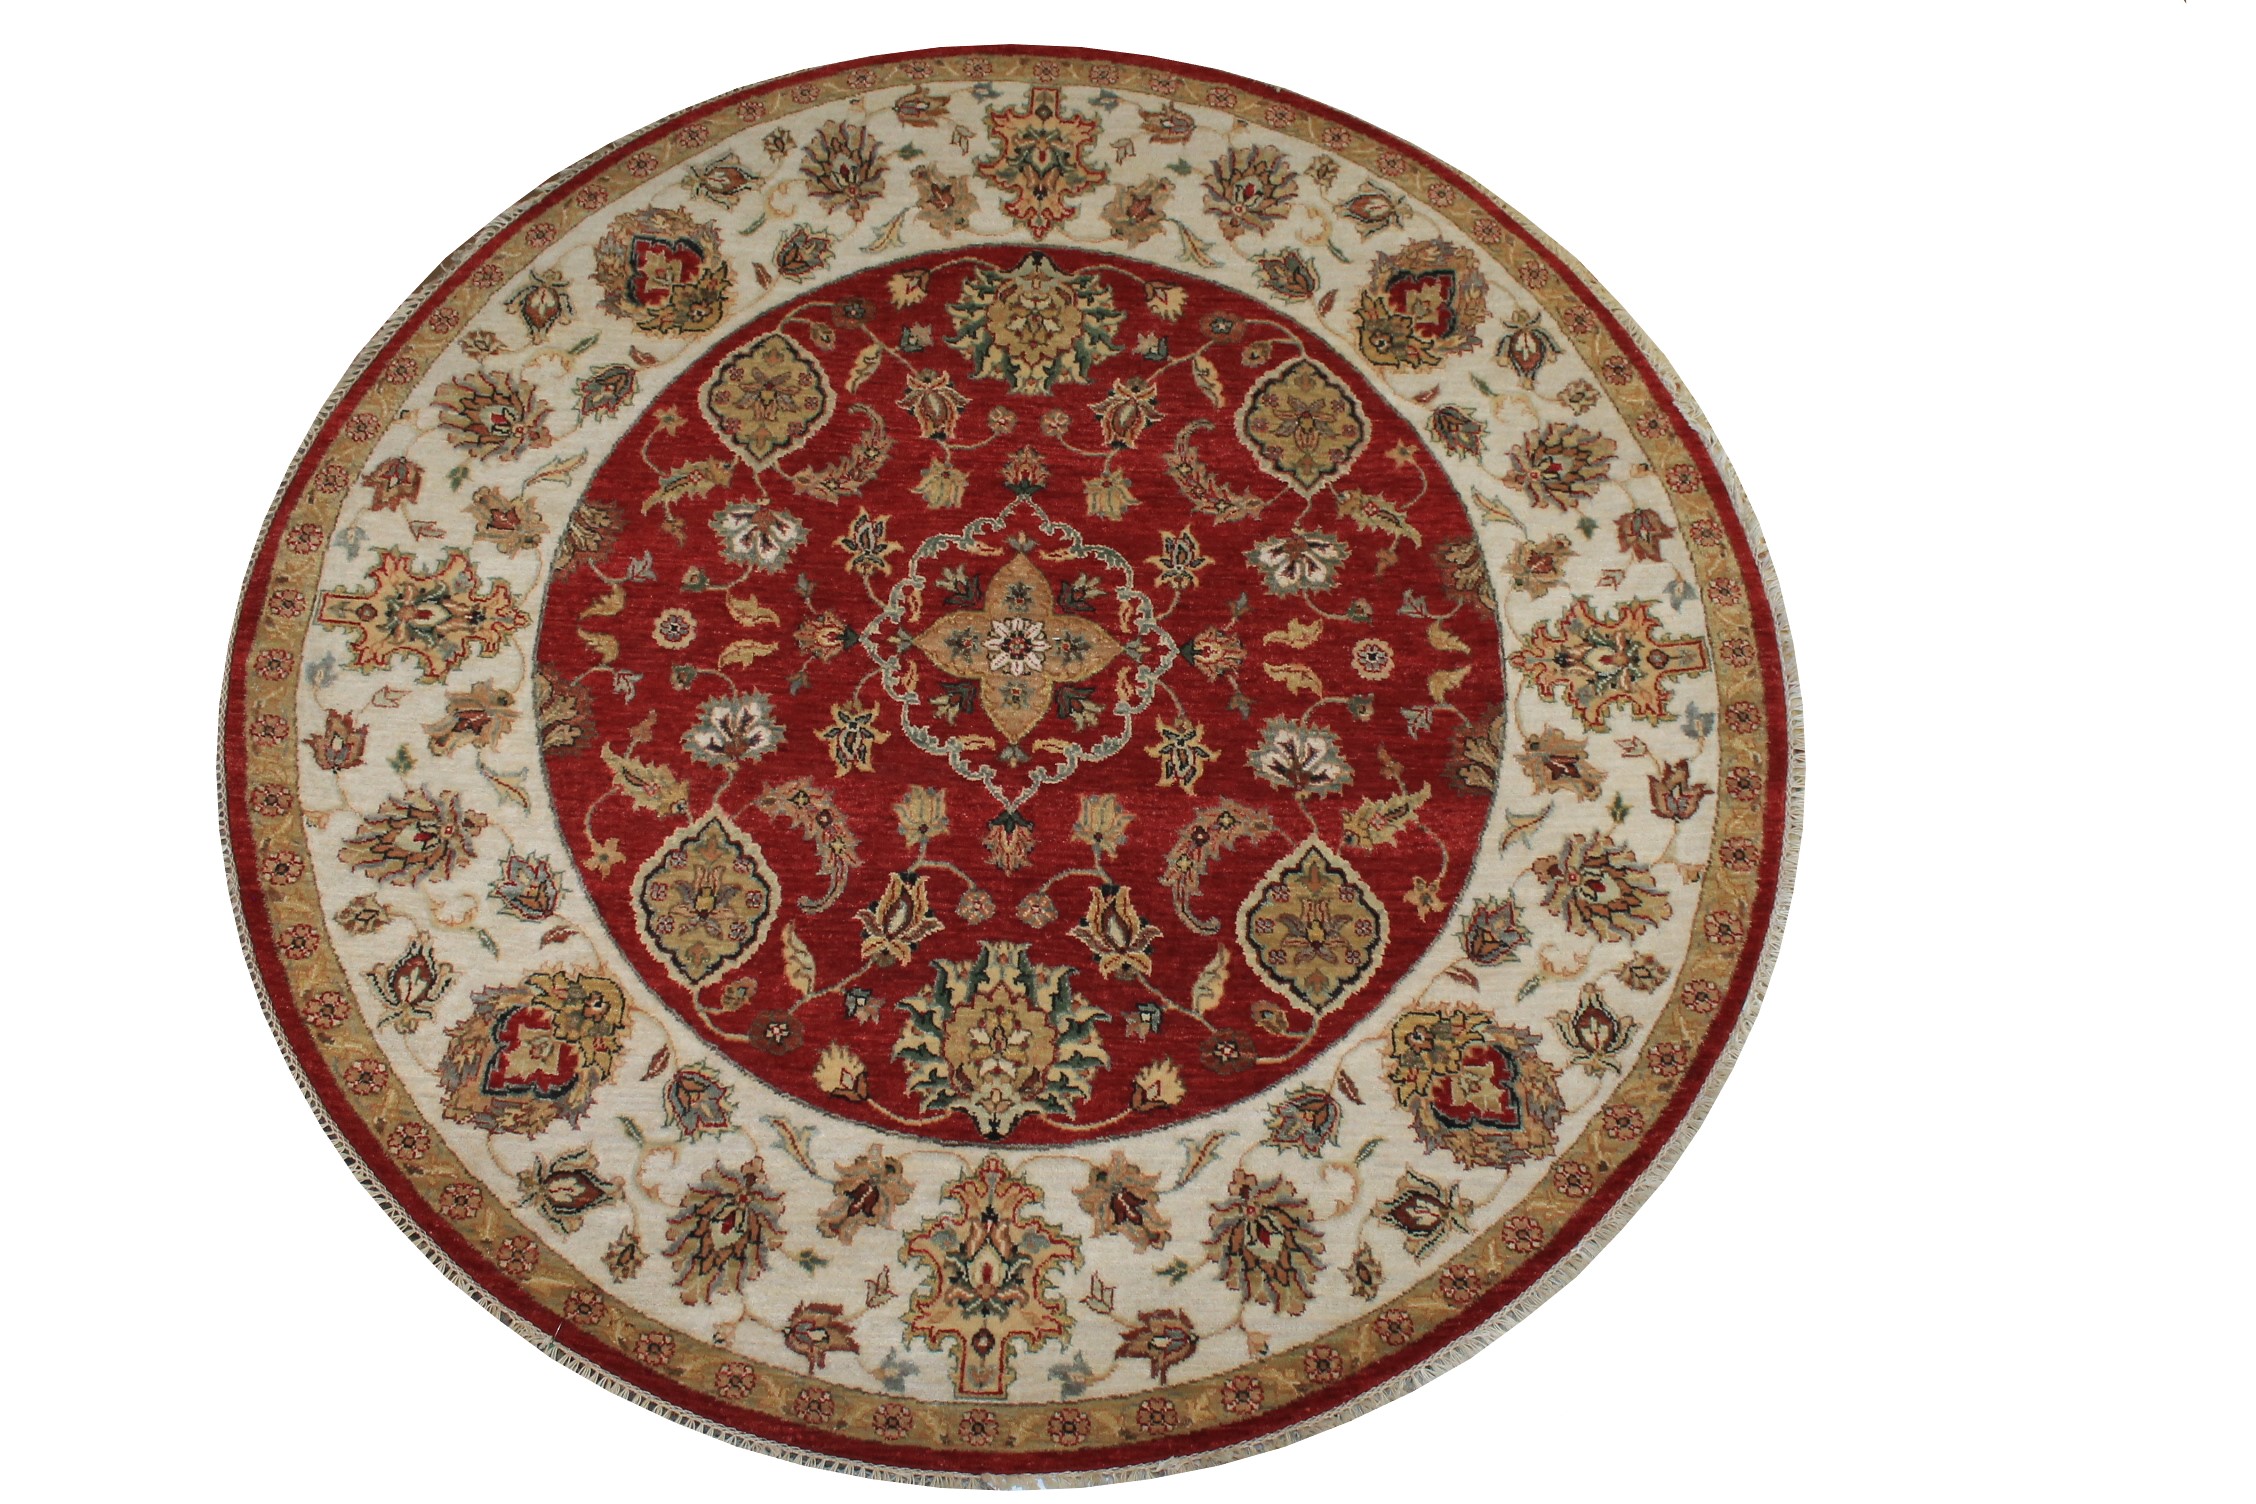 6 ft. - 7 ft. Round & Square Traditional Hand Knotted Wool Area Rug - MR024251